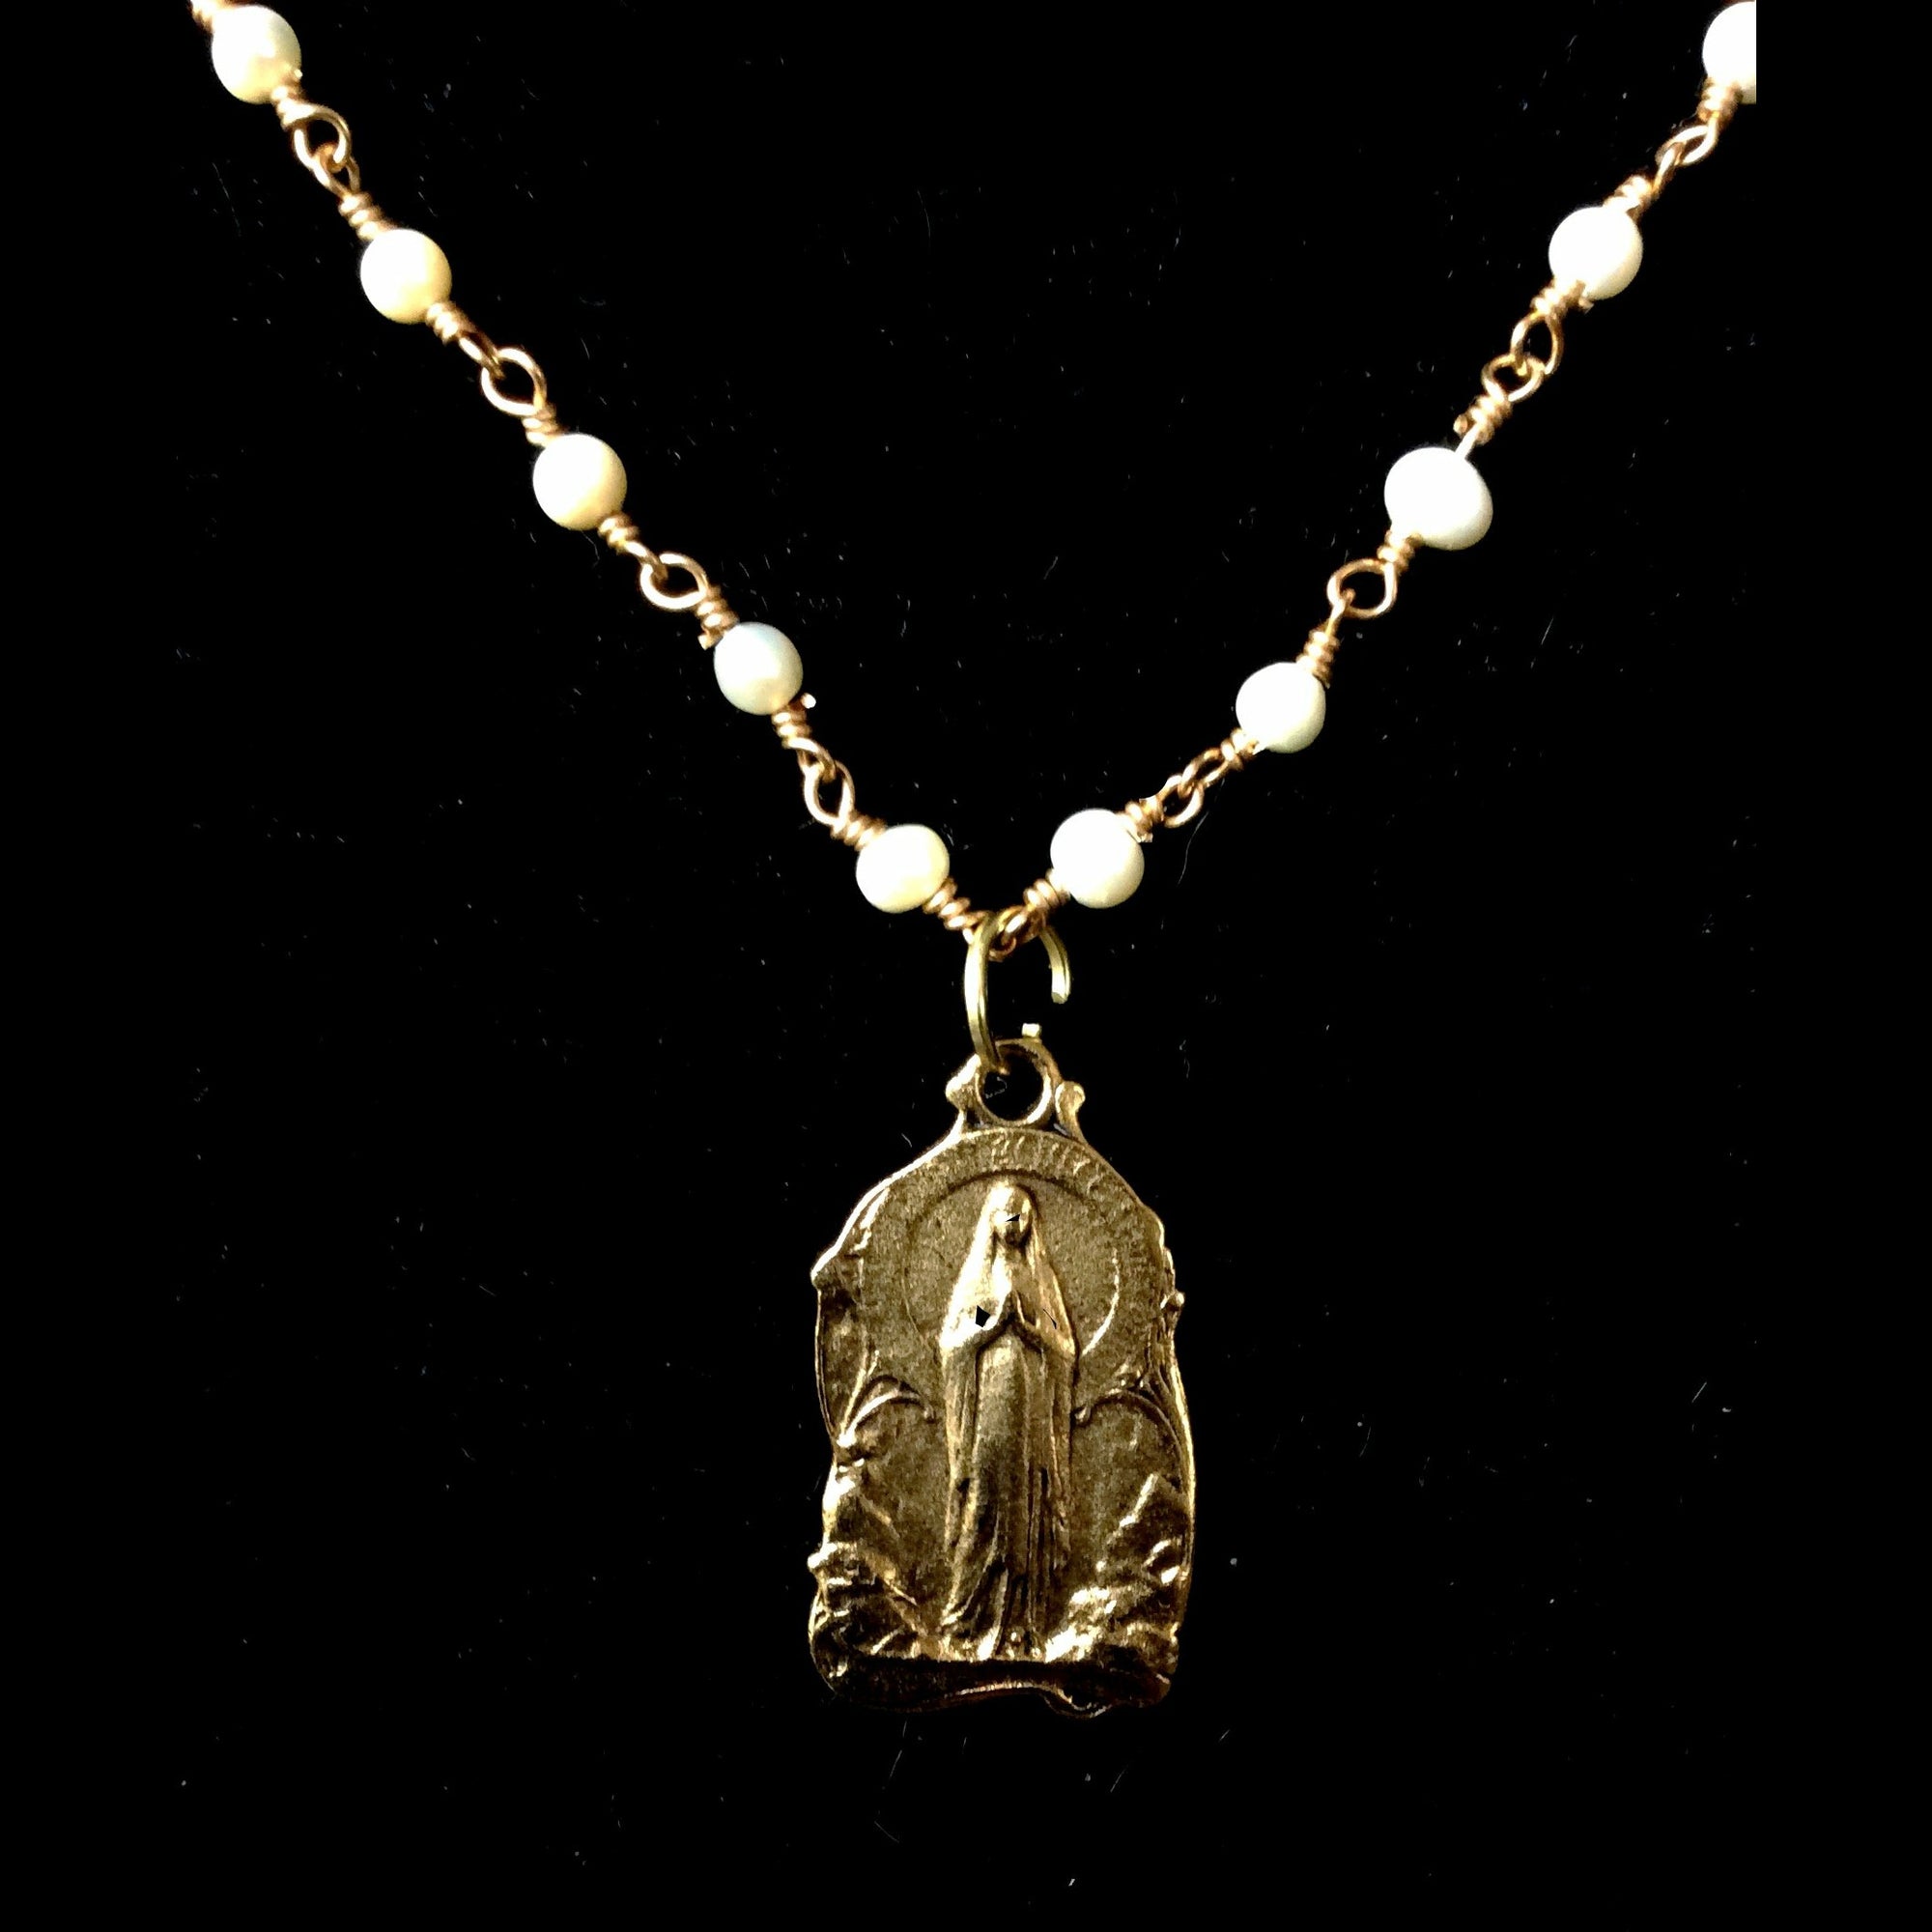 Our Lady of Lourdes Freshwater Pearl and Gold Necklace by Whispering Goddess